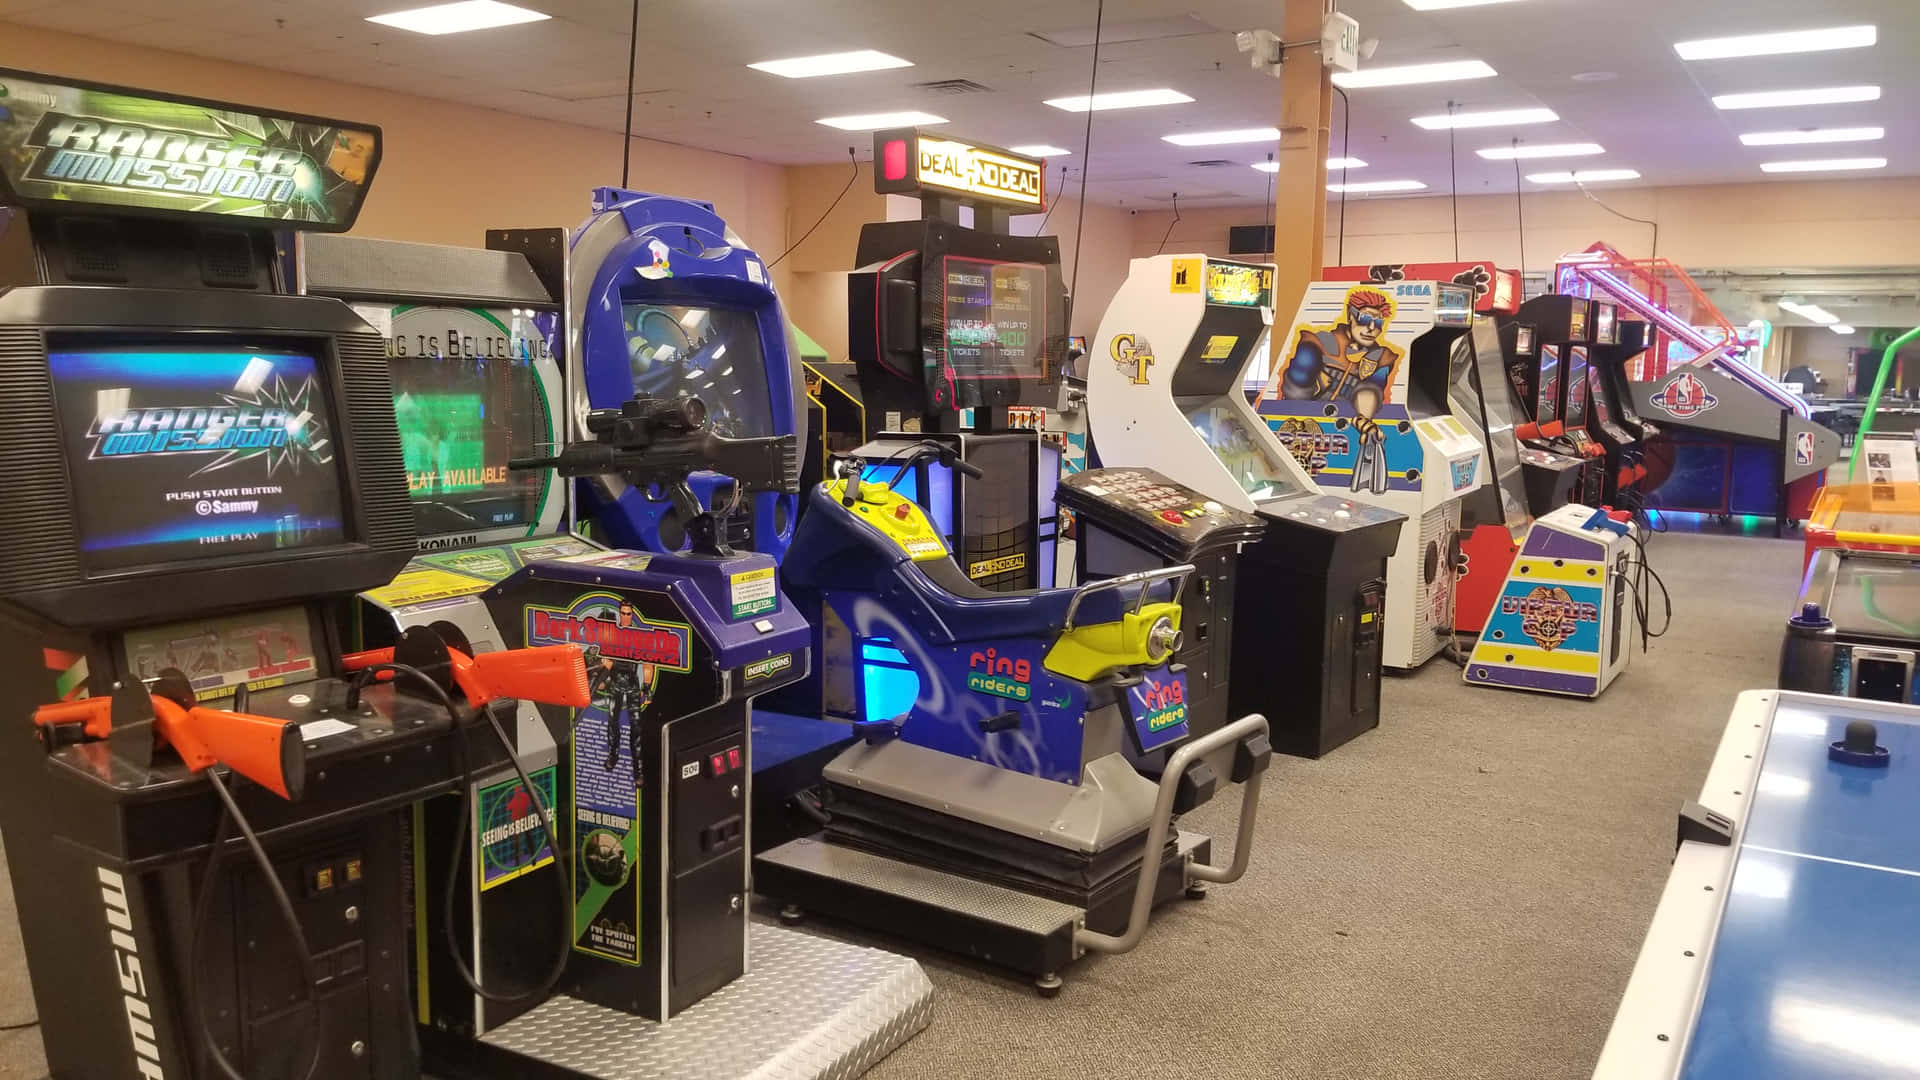 Thrilling Arcade Games in Action Wallpaper